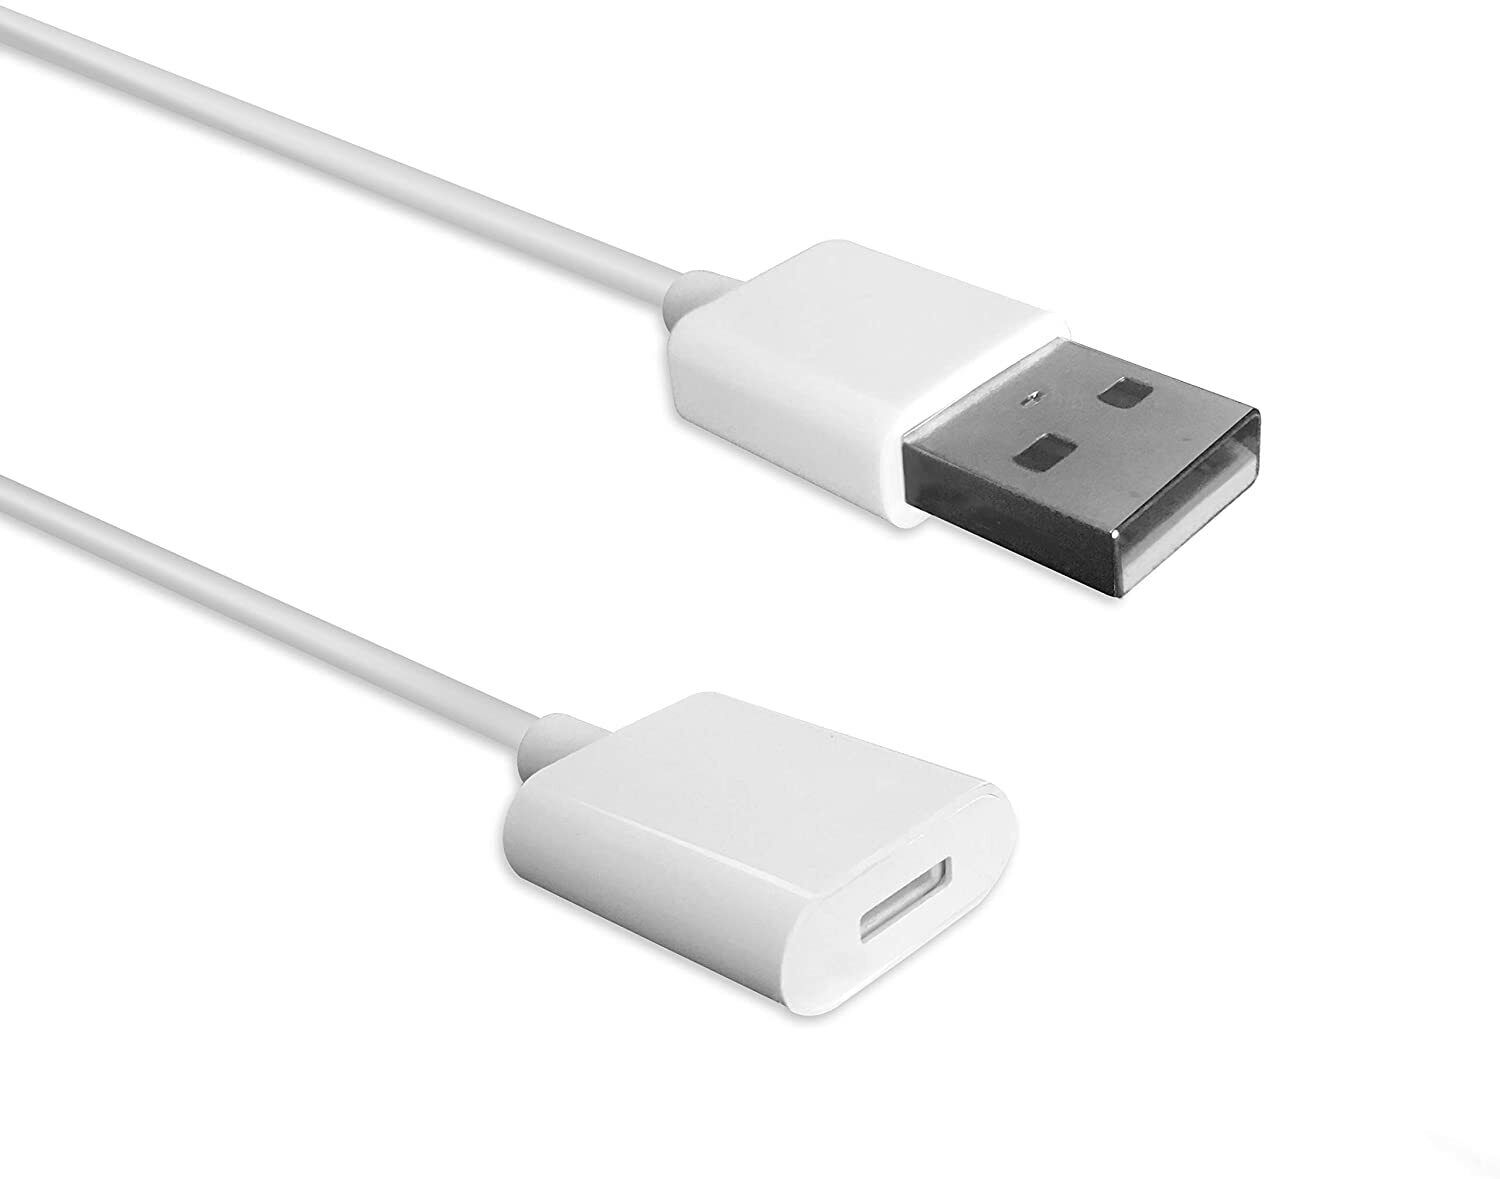 TechMatte Charging Adapter Cable Male to Female (White-1 Foot / 12 inches) 